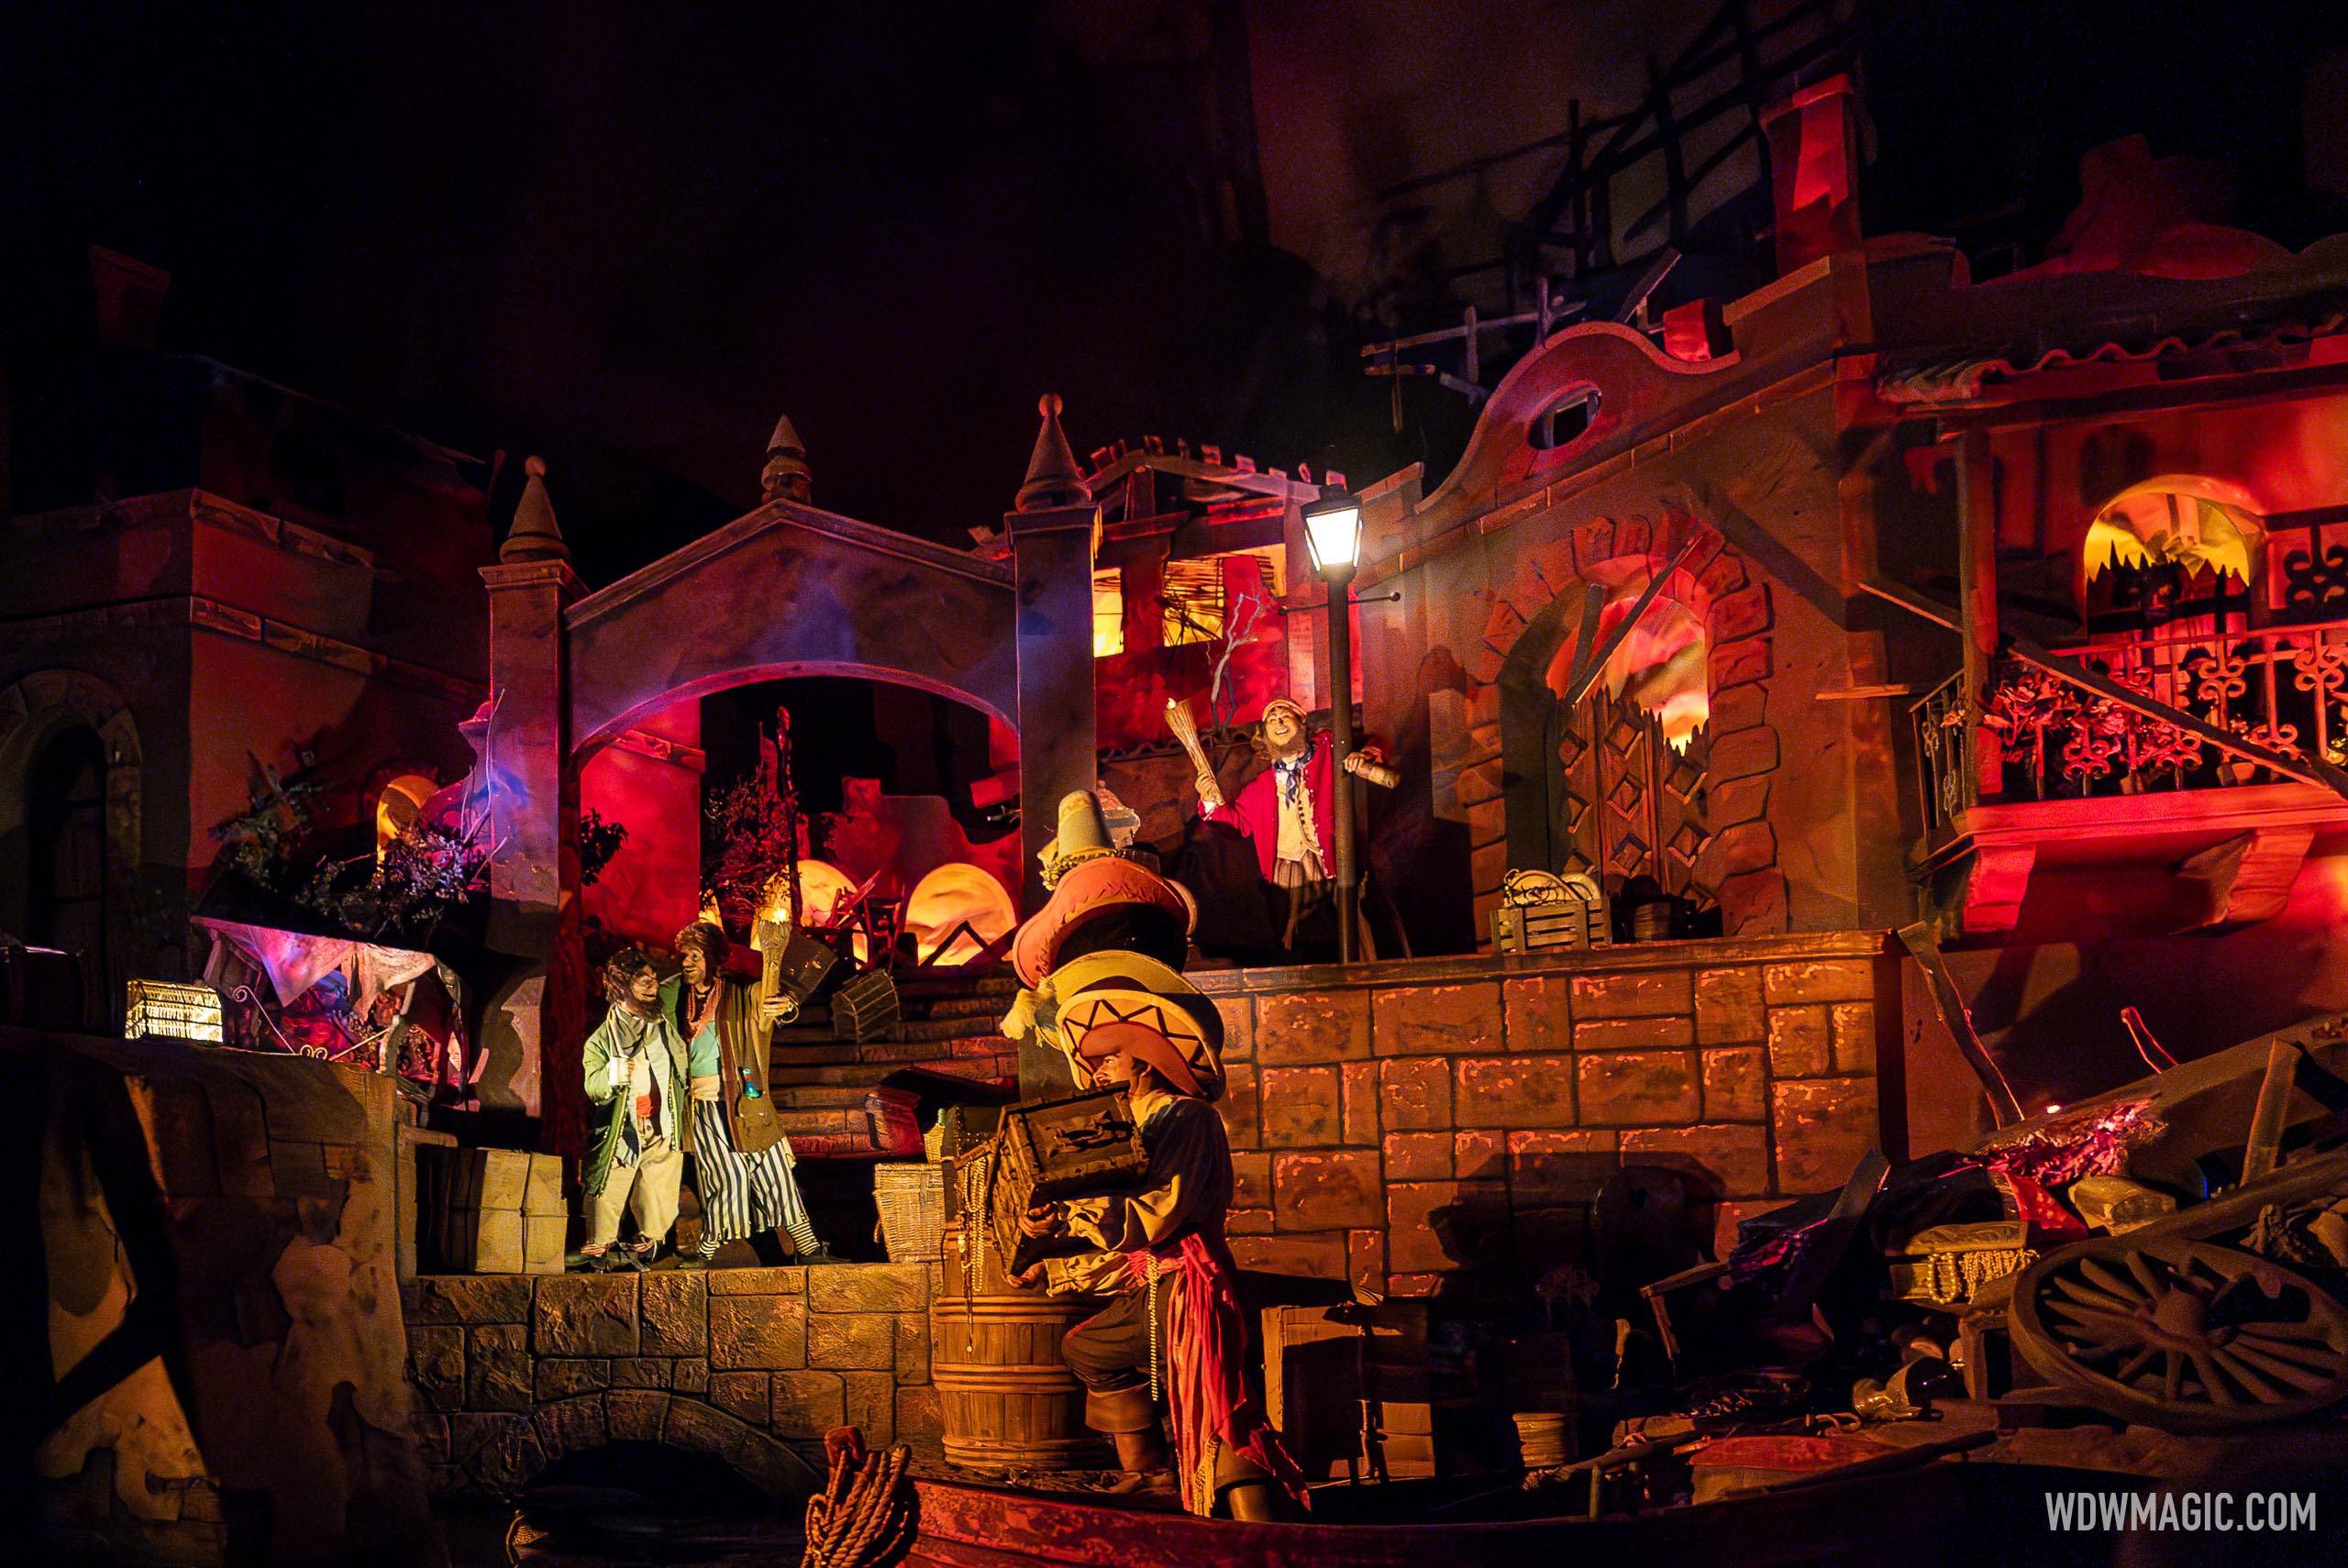 Pirates of the Caribbean closing for a day later this month